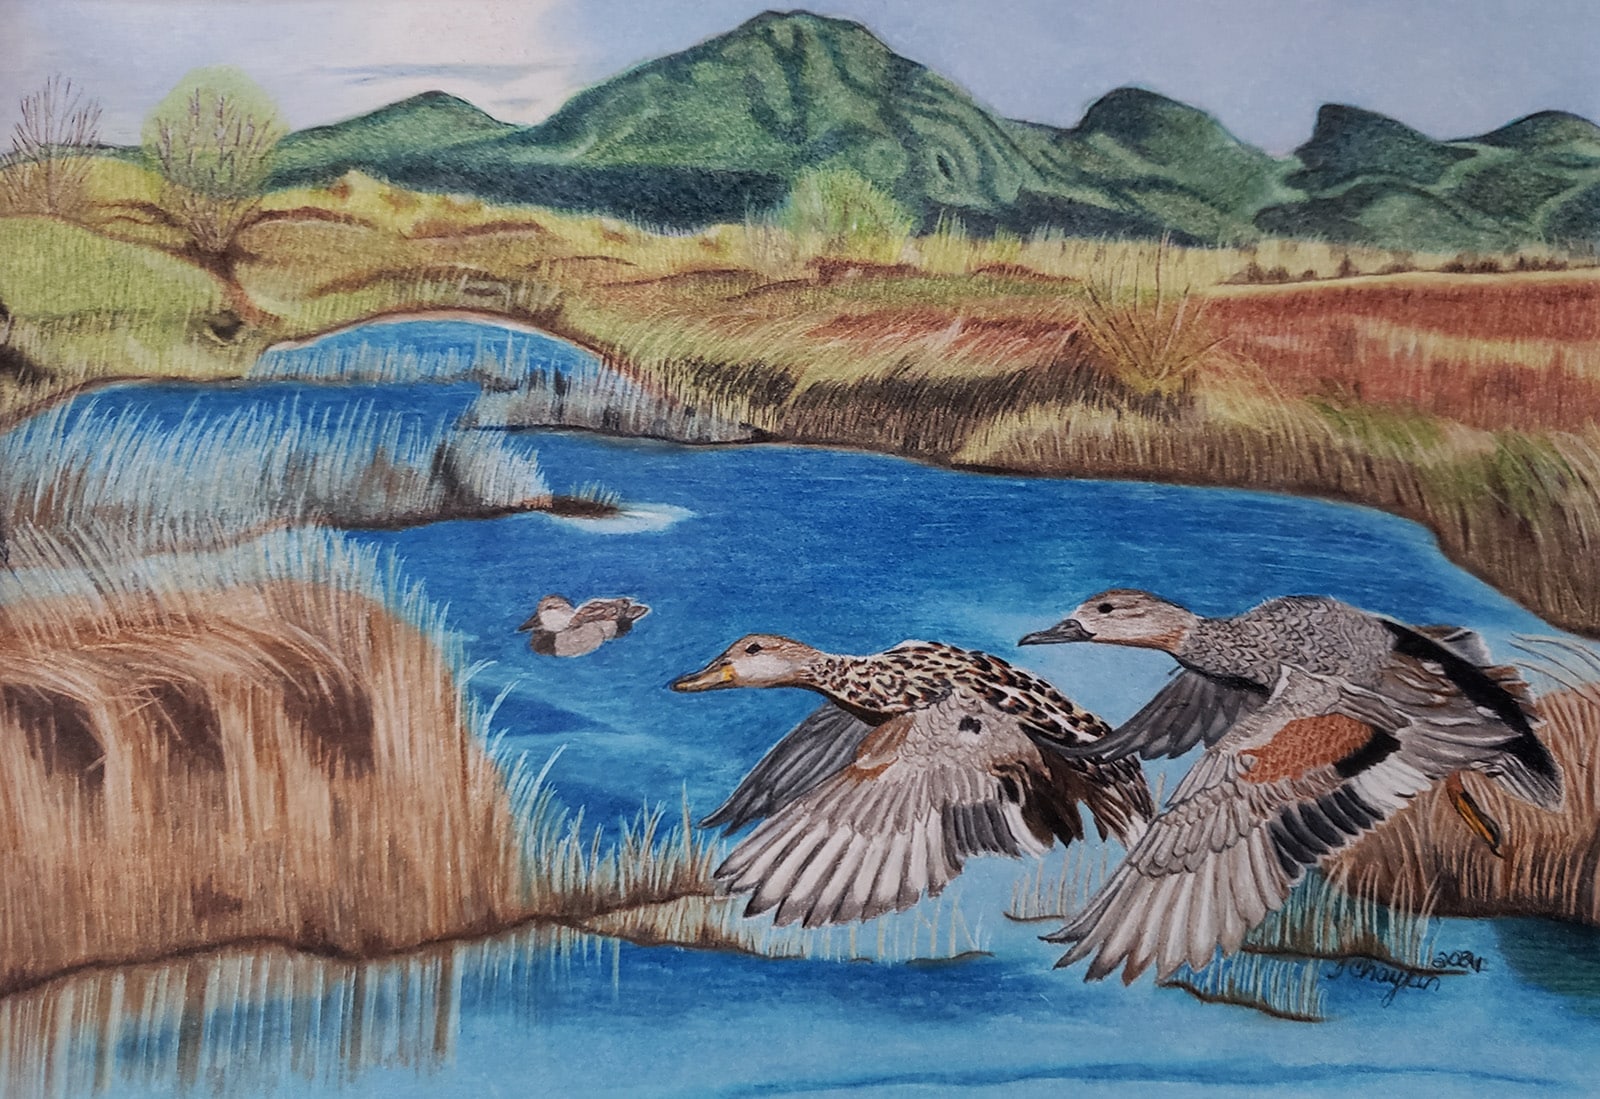 "Gadwall Haven" by Tracey Chaykin